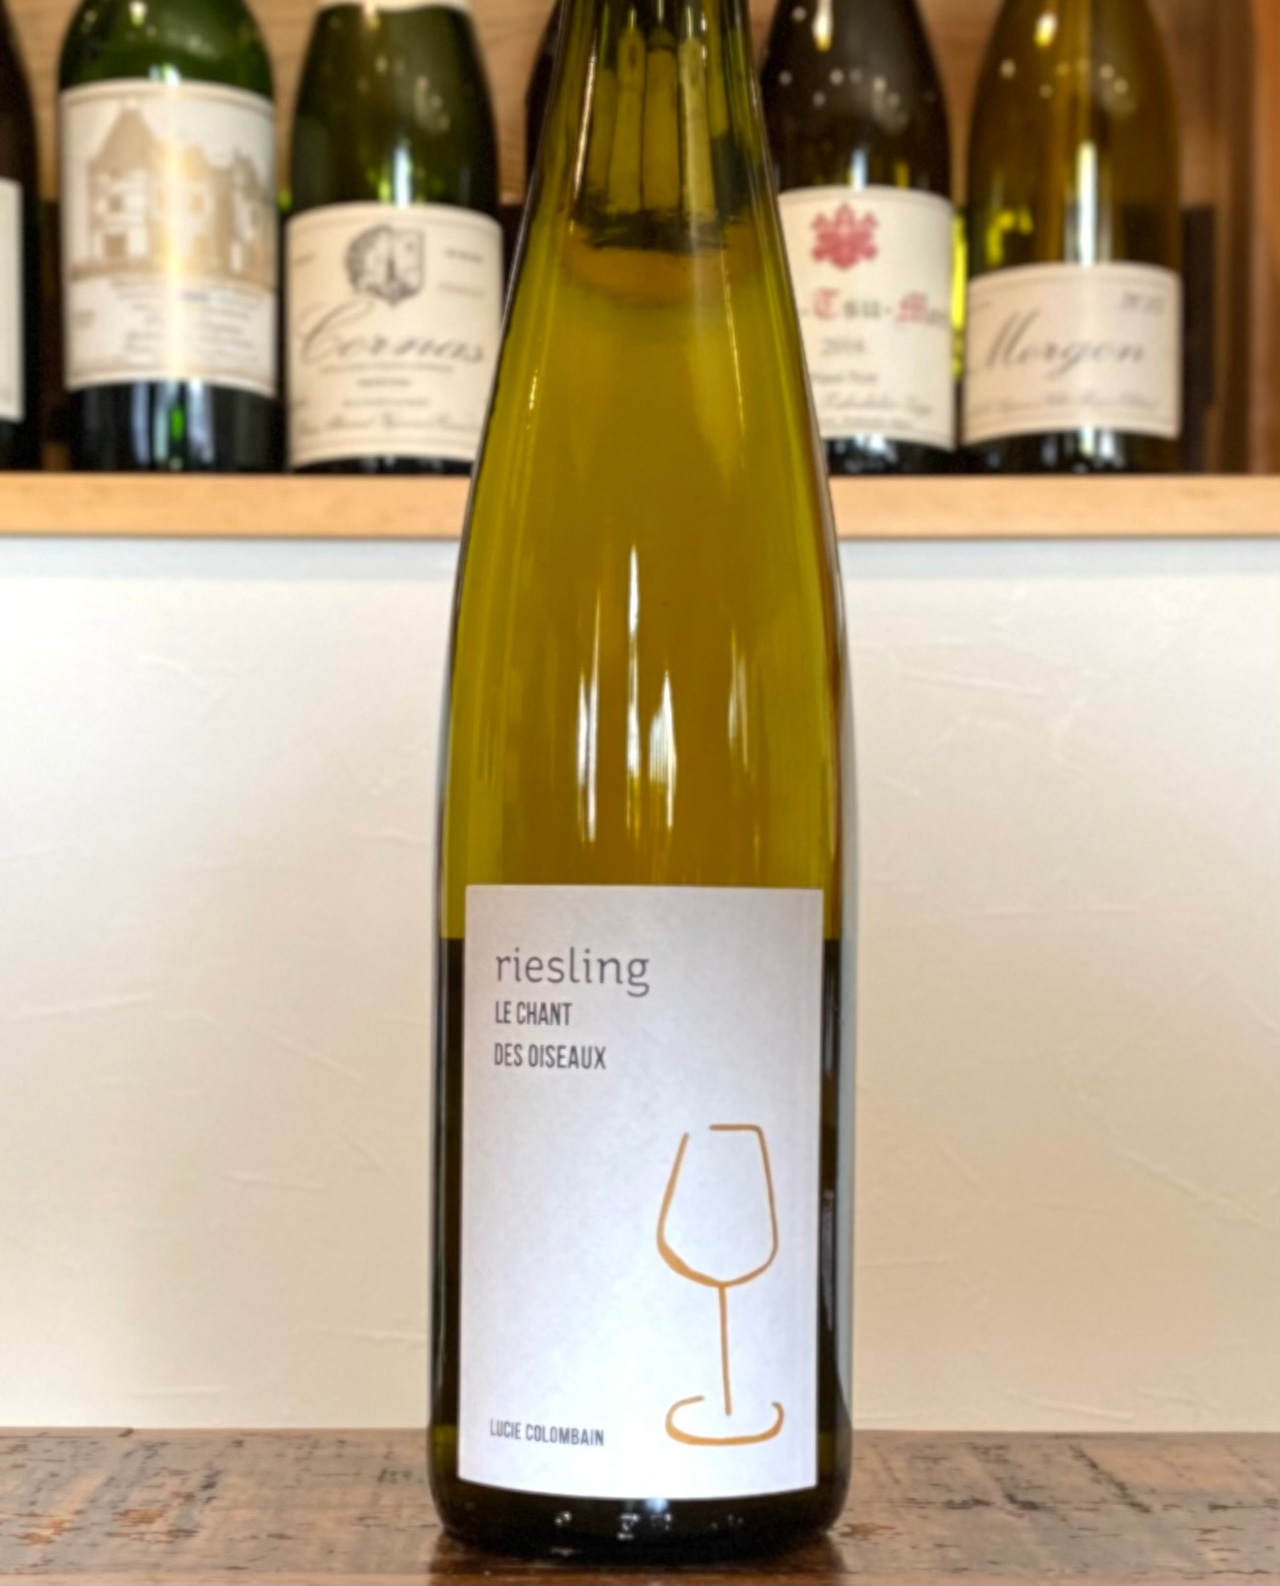 Riesling Le Chant des Oiseaux リースリング･ル･シャン･デ･ゾワゾー【2020】/Lucie Colombain ルーシー･コロンバン